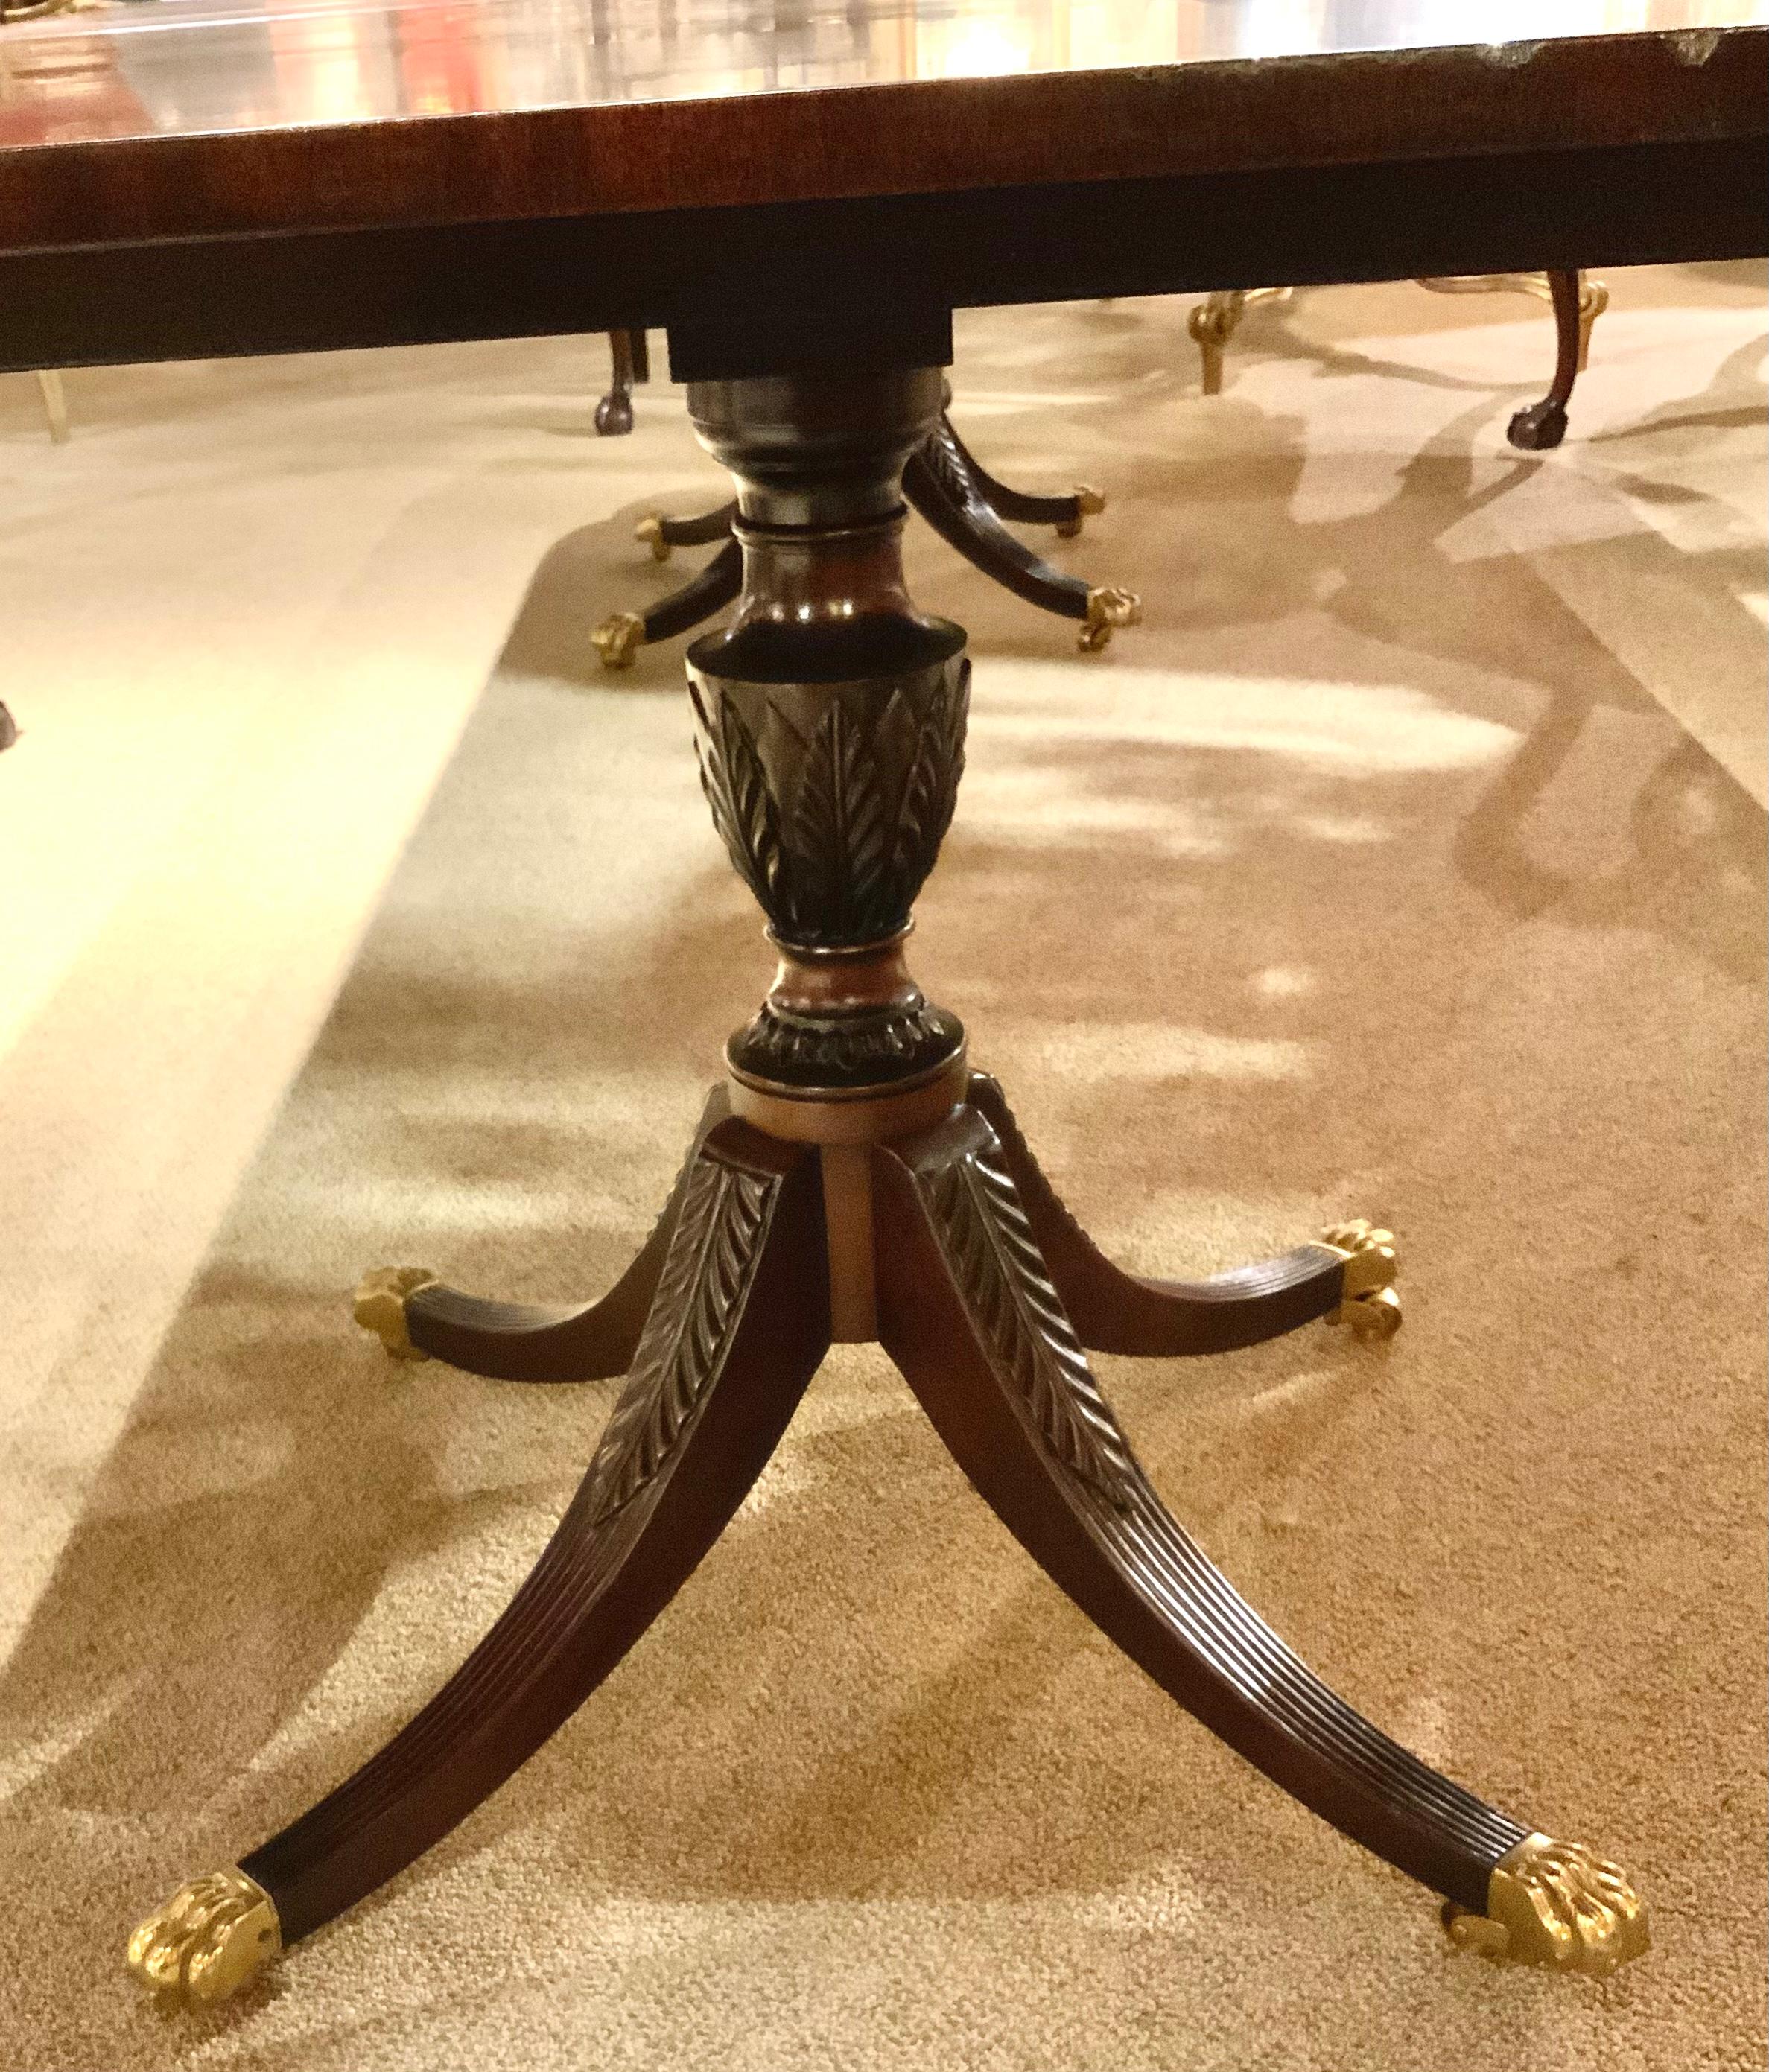 20th Century Mahogany double pedestal george III - style dining table with four leaves